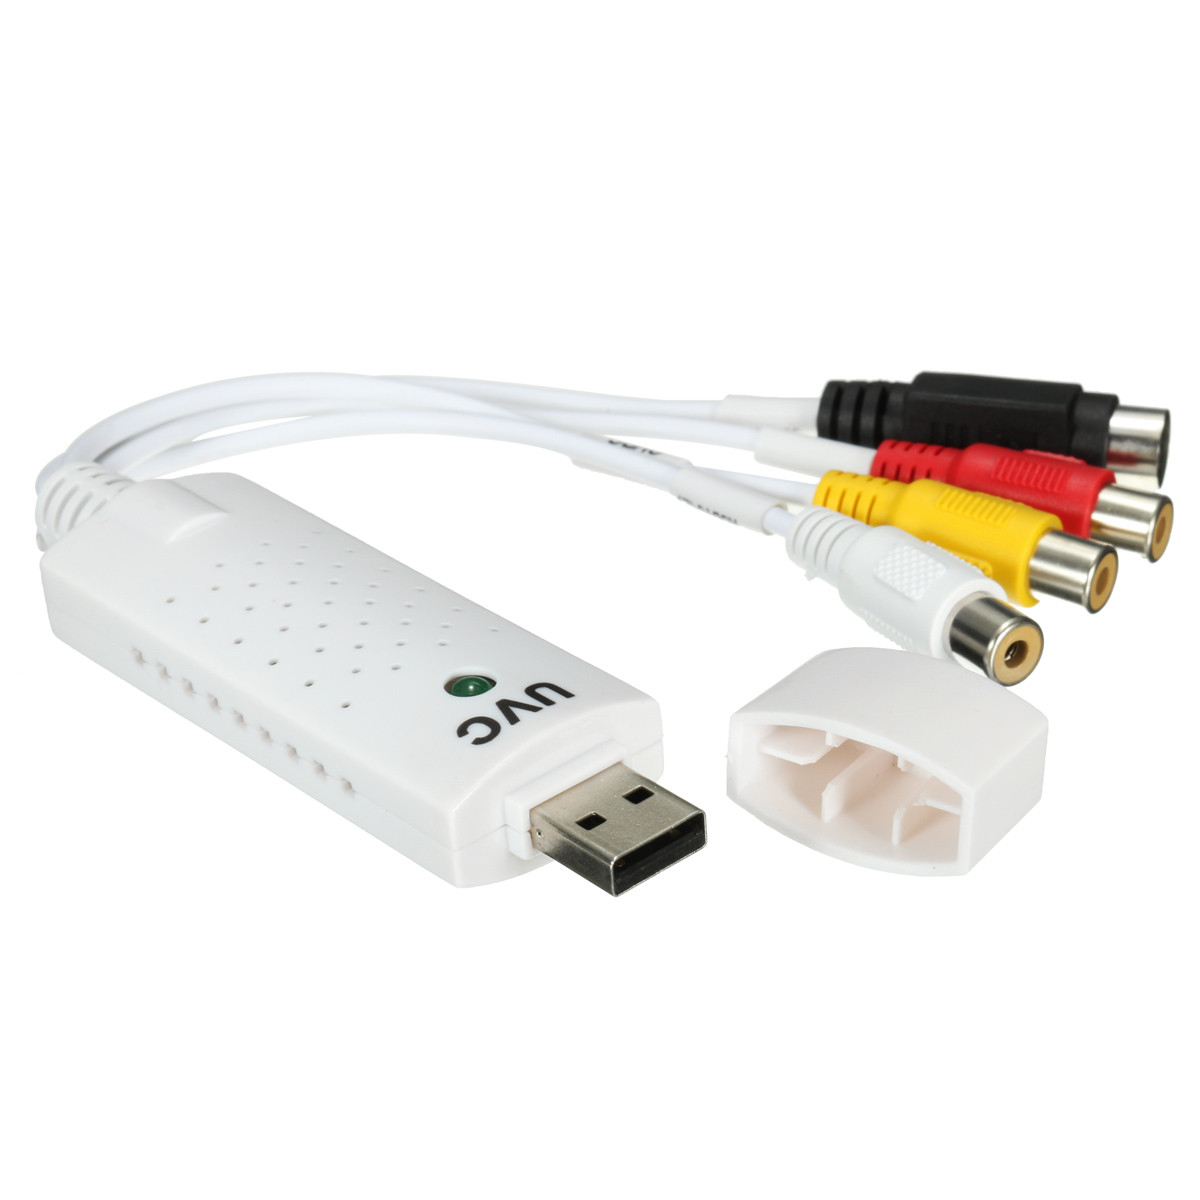 Eclipse Usb Video Adapter Driver Download